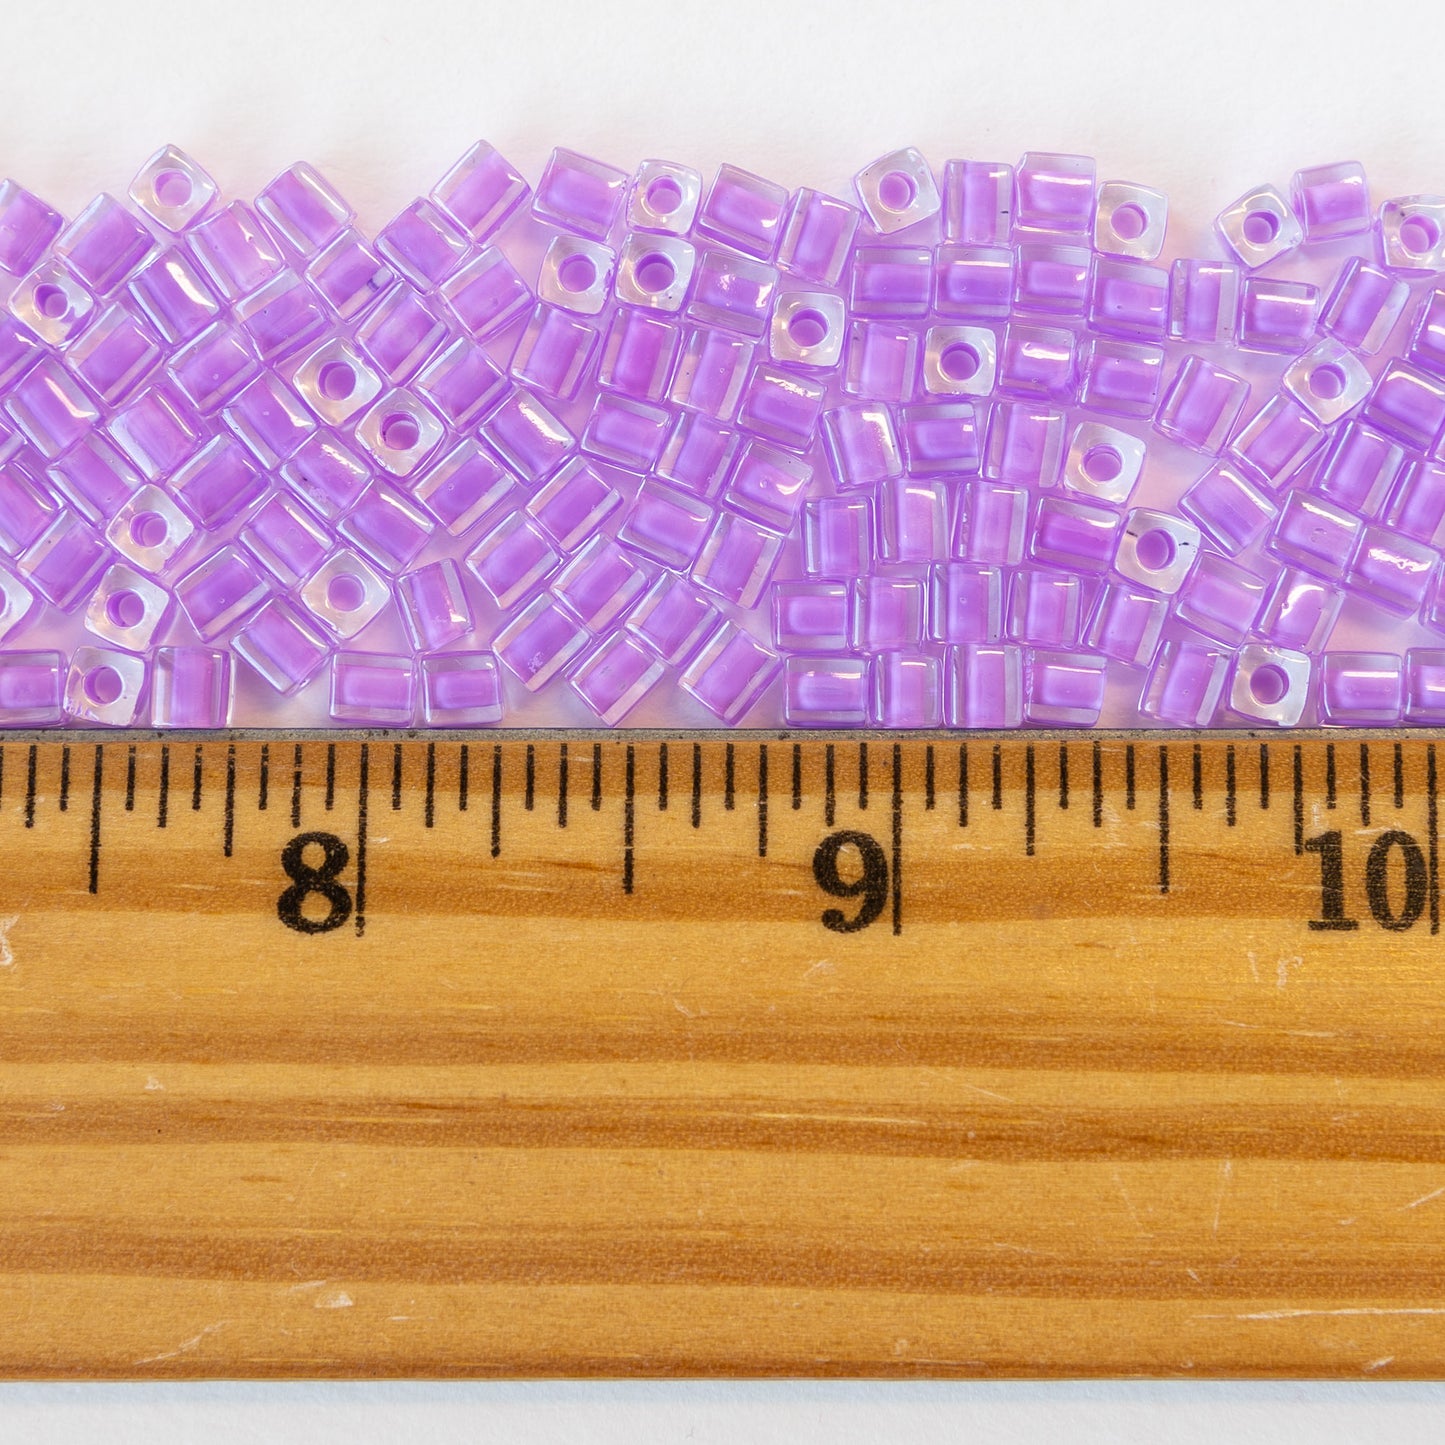 4mm Miyuki Cube Beads  - Orchid Lined Crystal - 20 or 60 grams